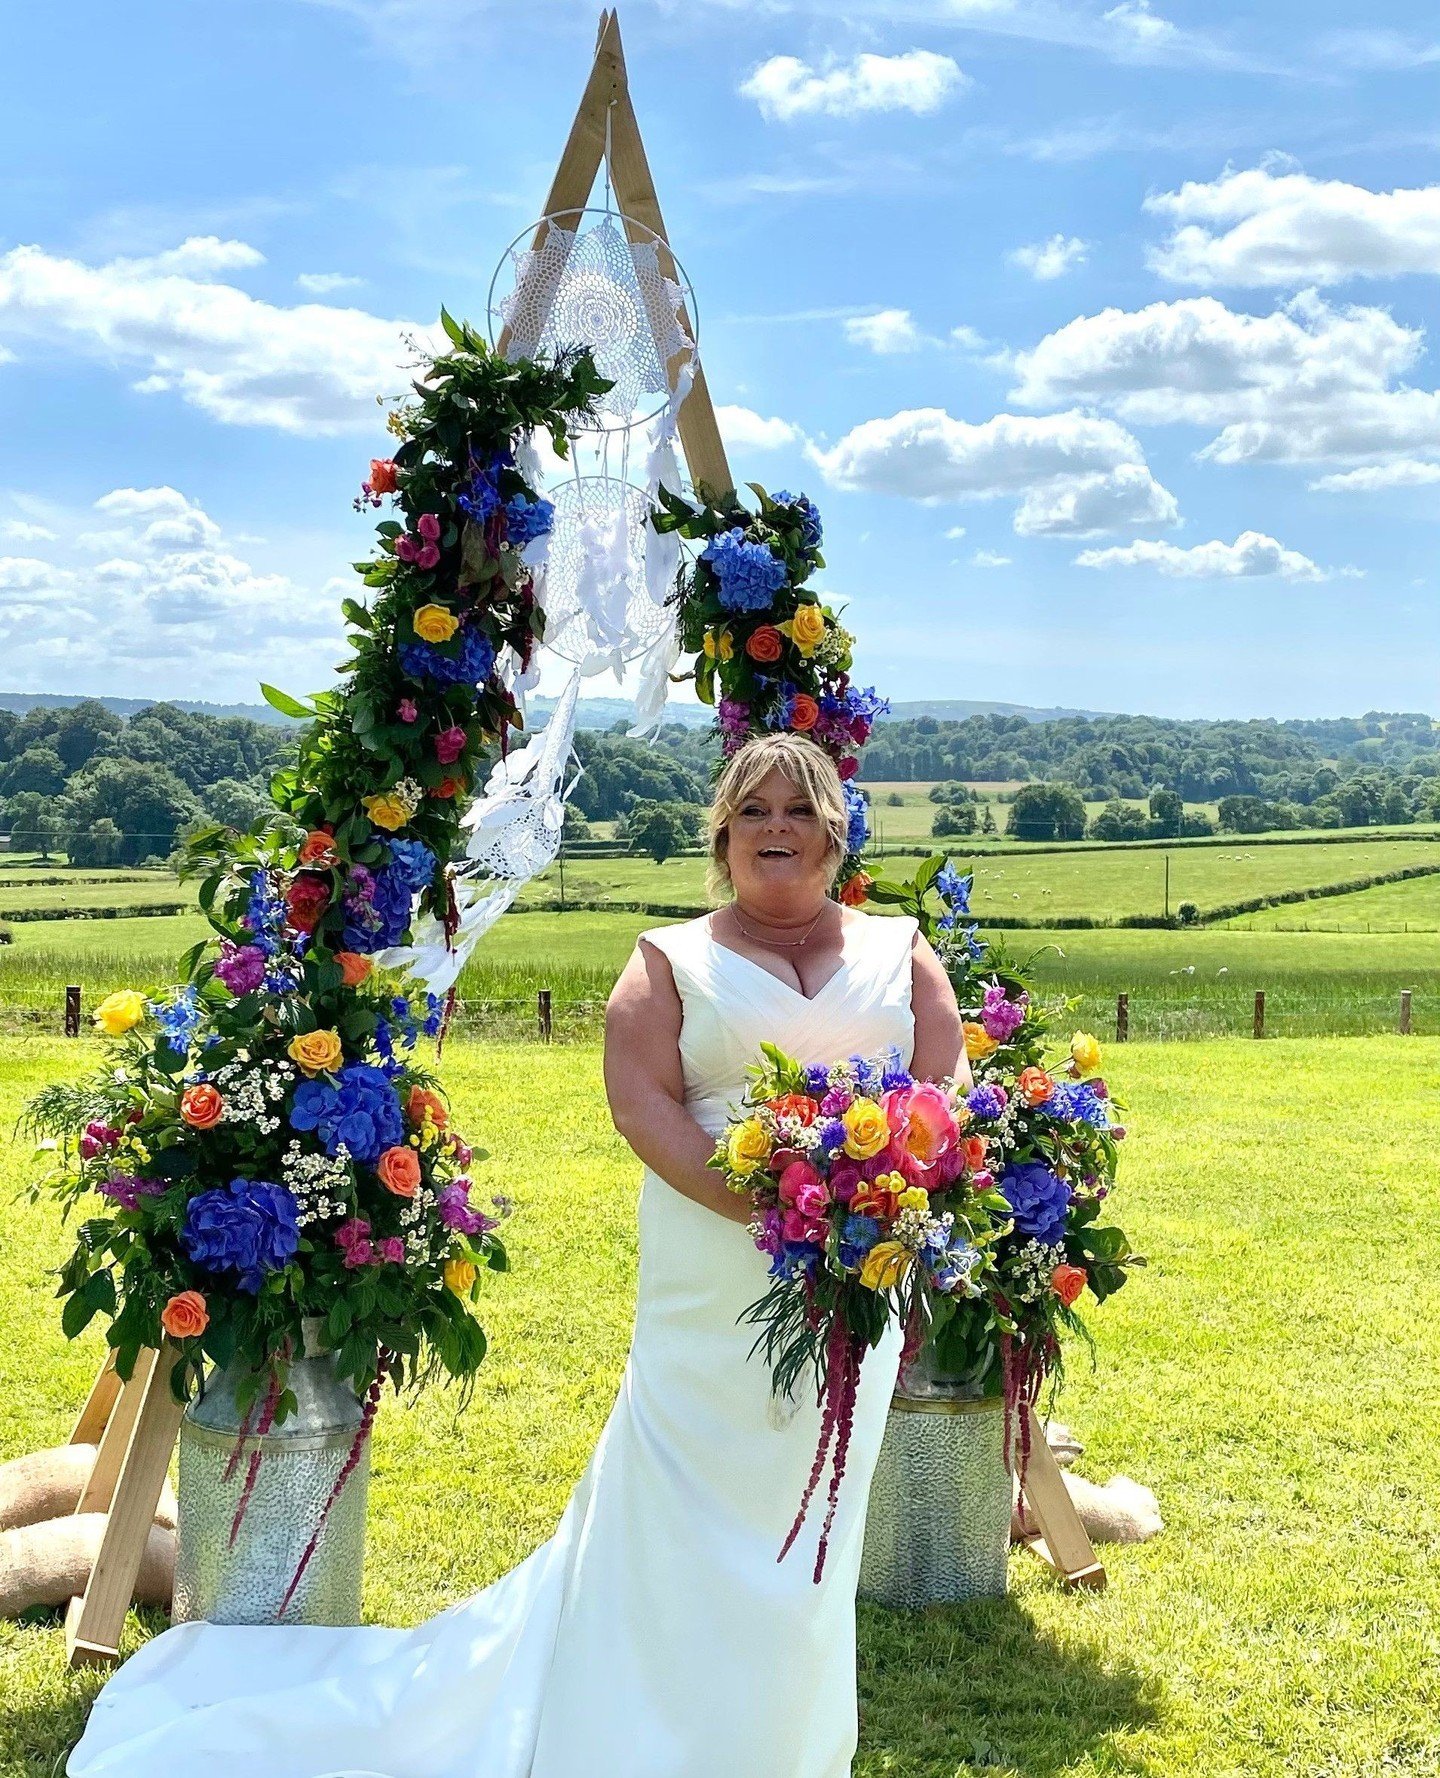 Not long to go now until outside weddings are back on the agenda.⁠
Some of our favourite outside venues ...⁠
⁠
#summerweddings #outdoorweddings #ribblevalleyweddings #lancashireweddingflorist #flowerswithpassion